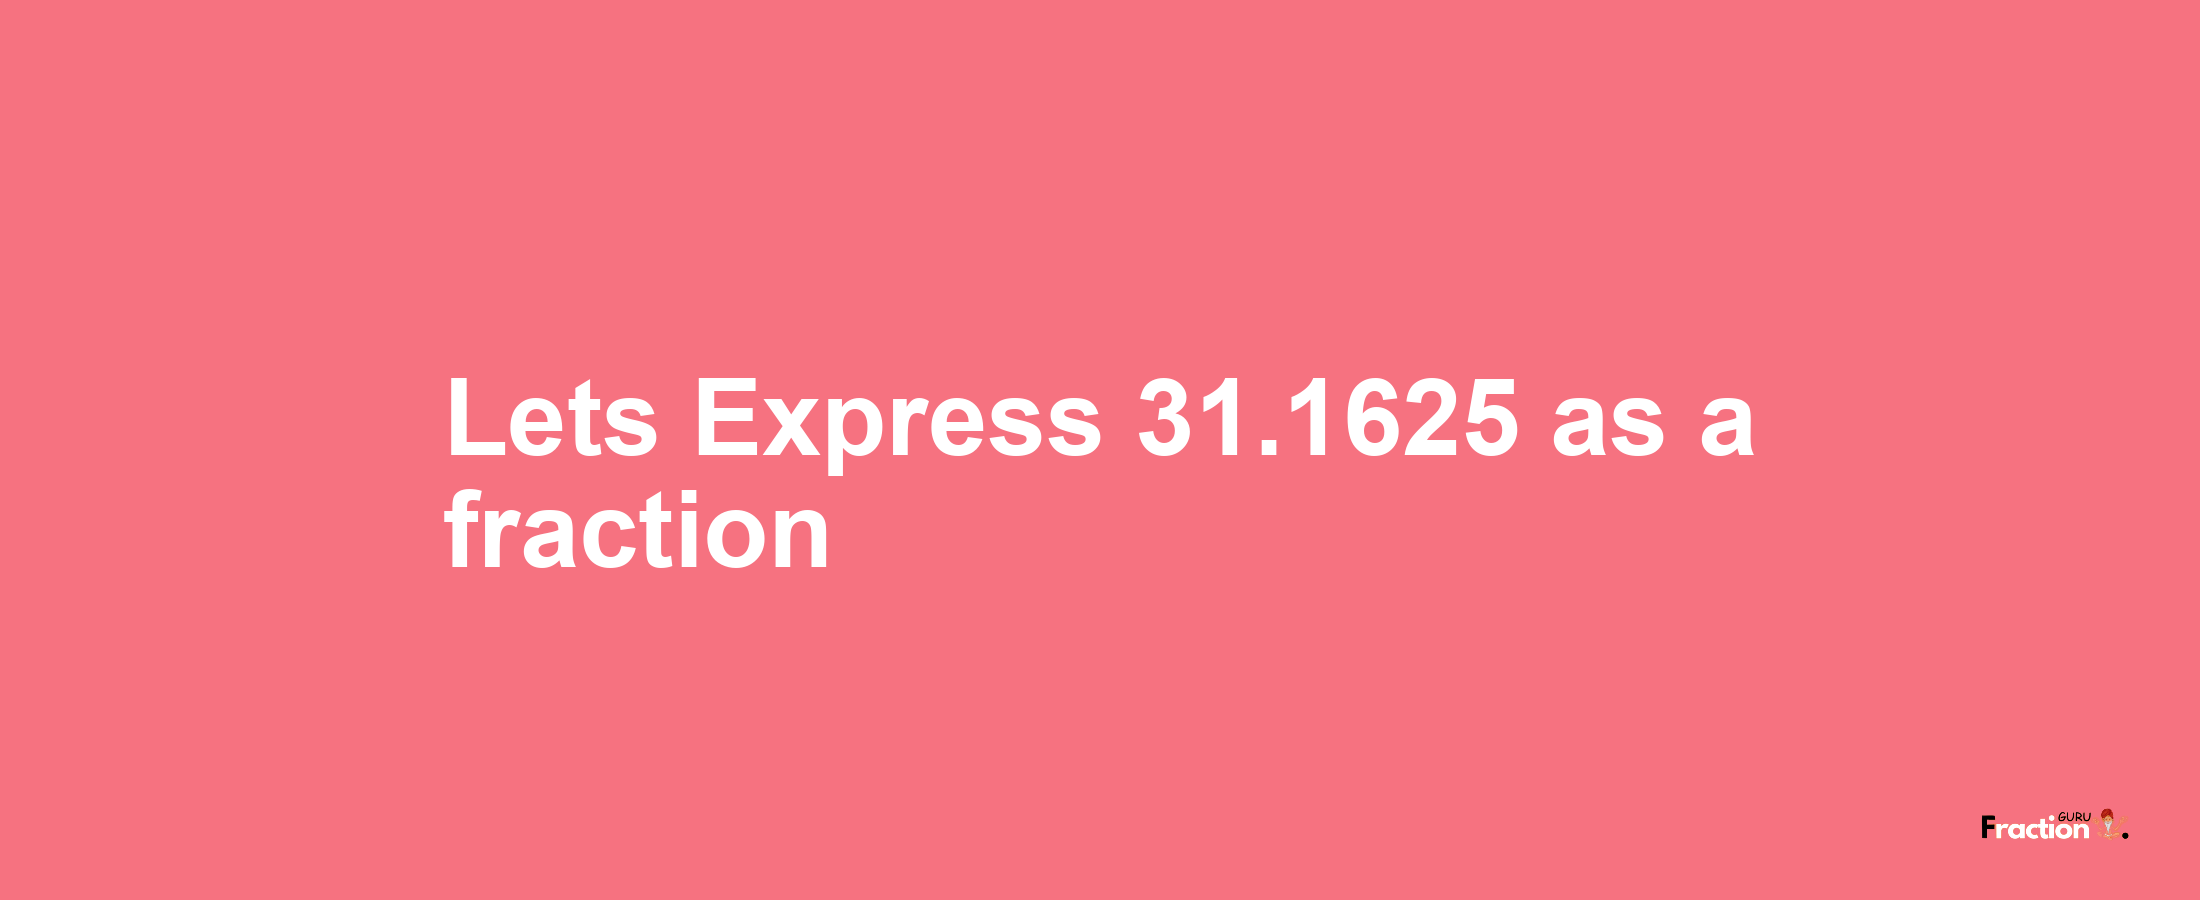 Lets Express 31.1625 as afraction